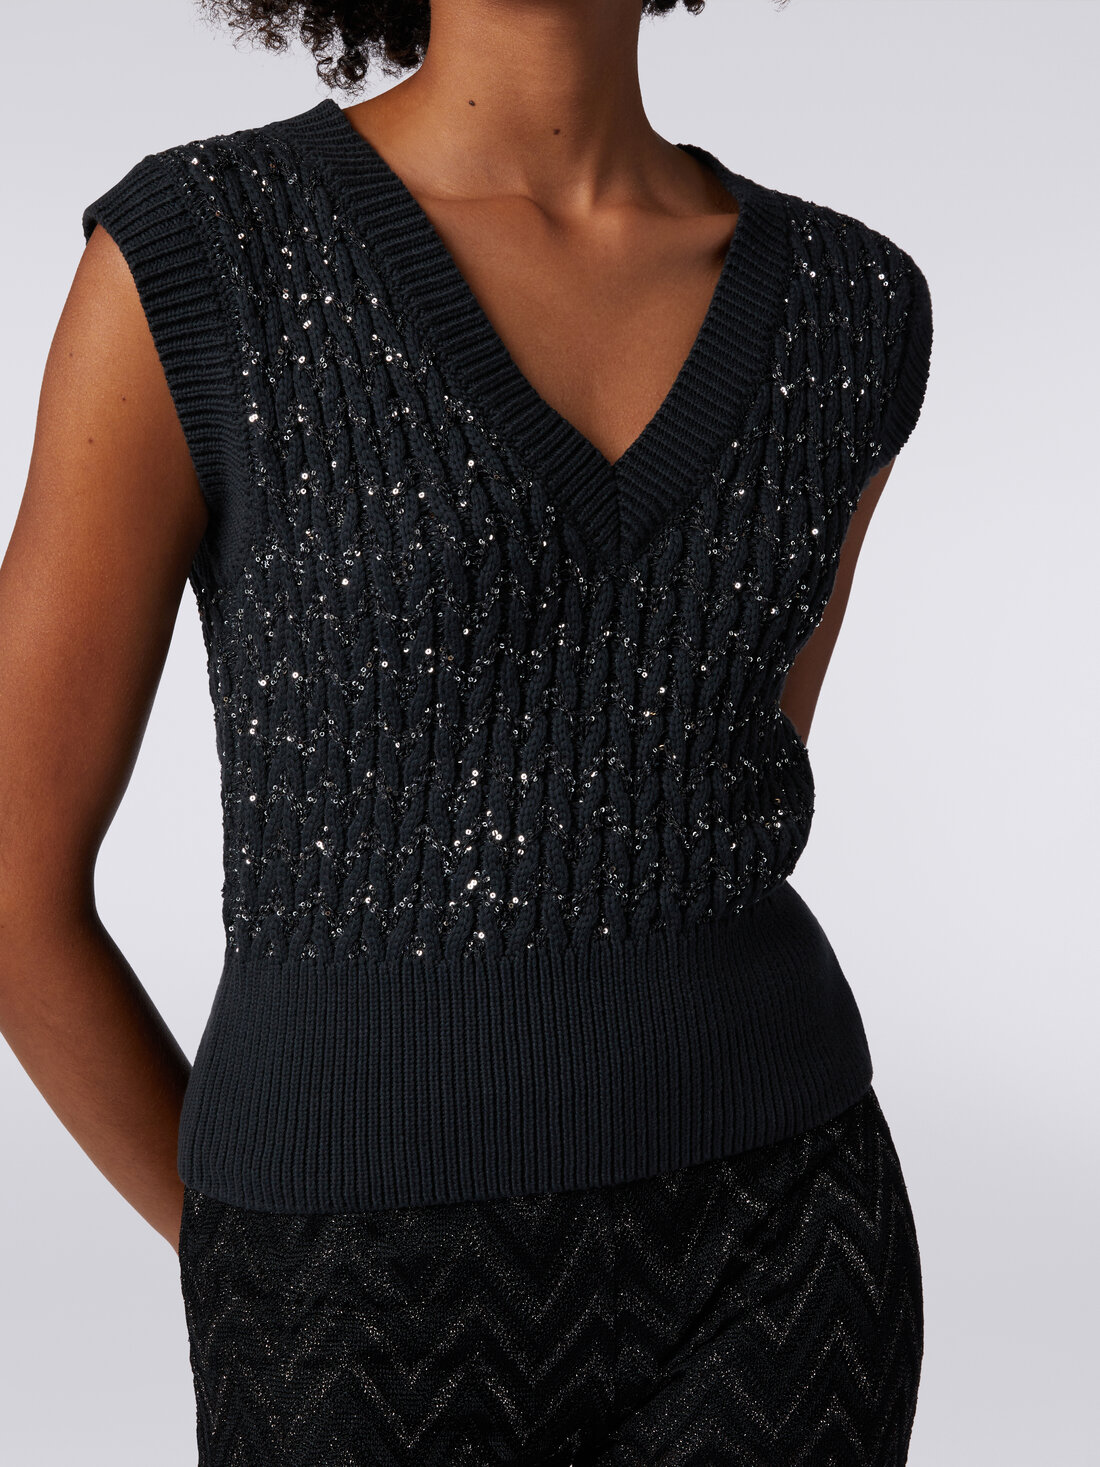 Cotton blend gilet with sequins and braiding, Black    - DS24SN08BK033OS90DI - 3